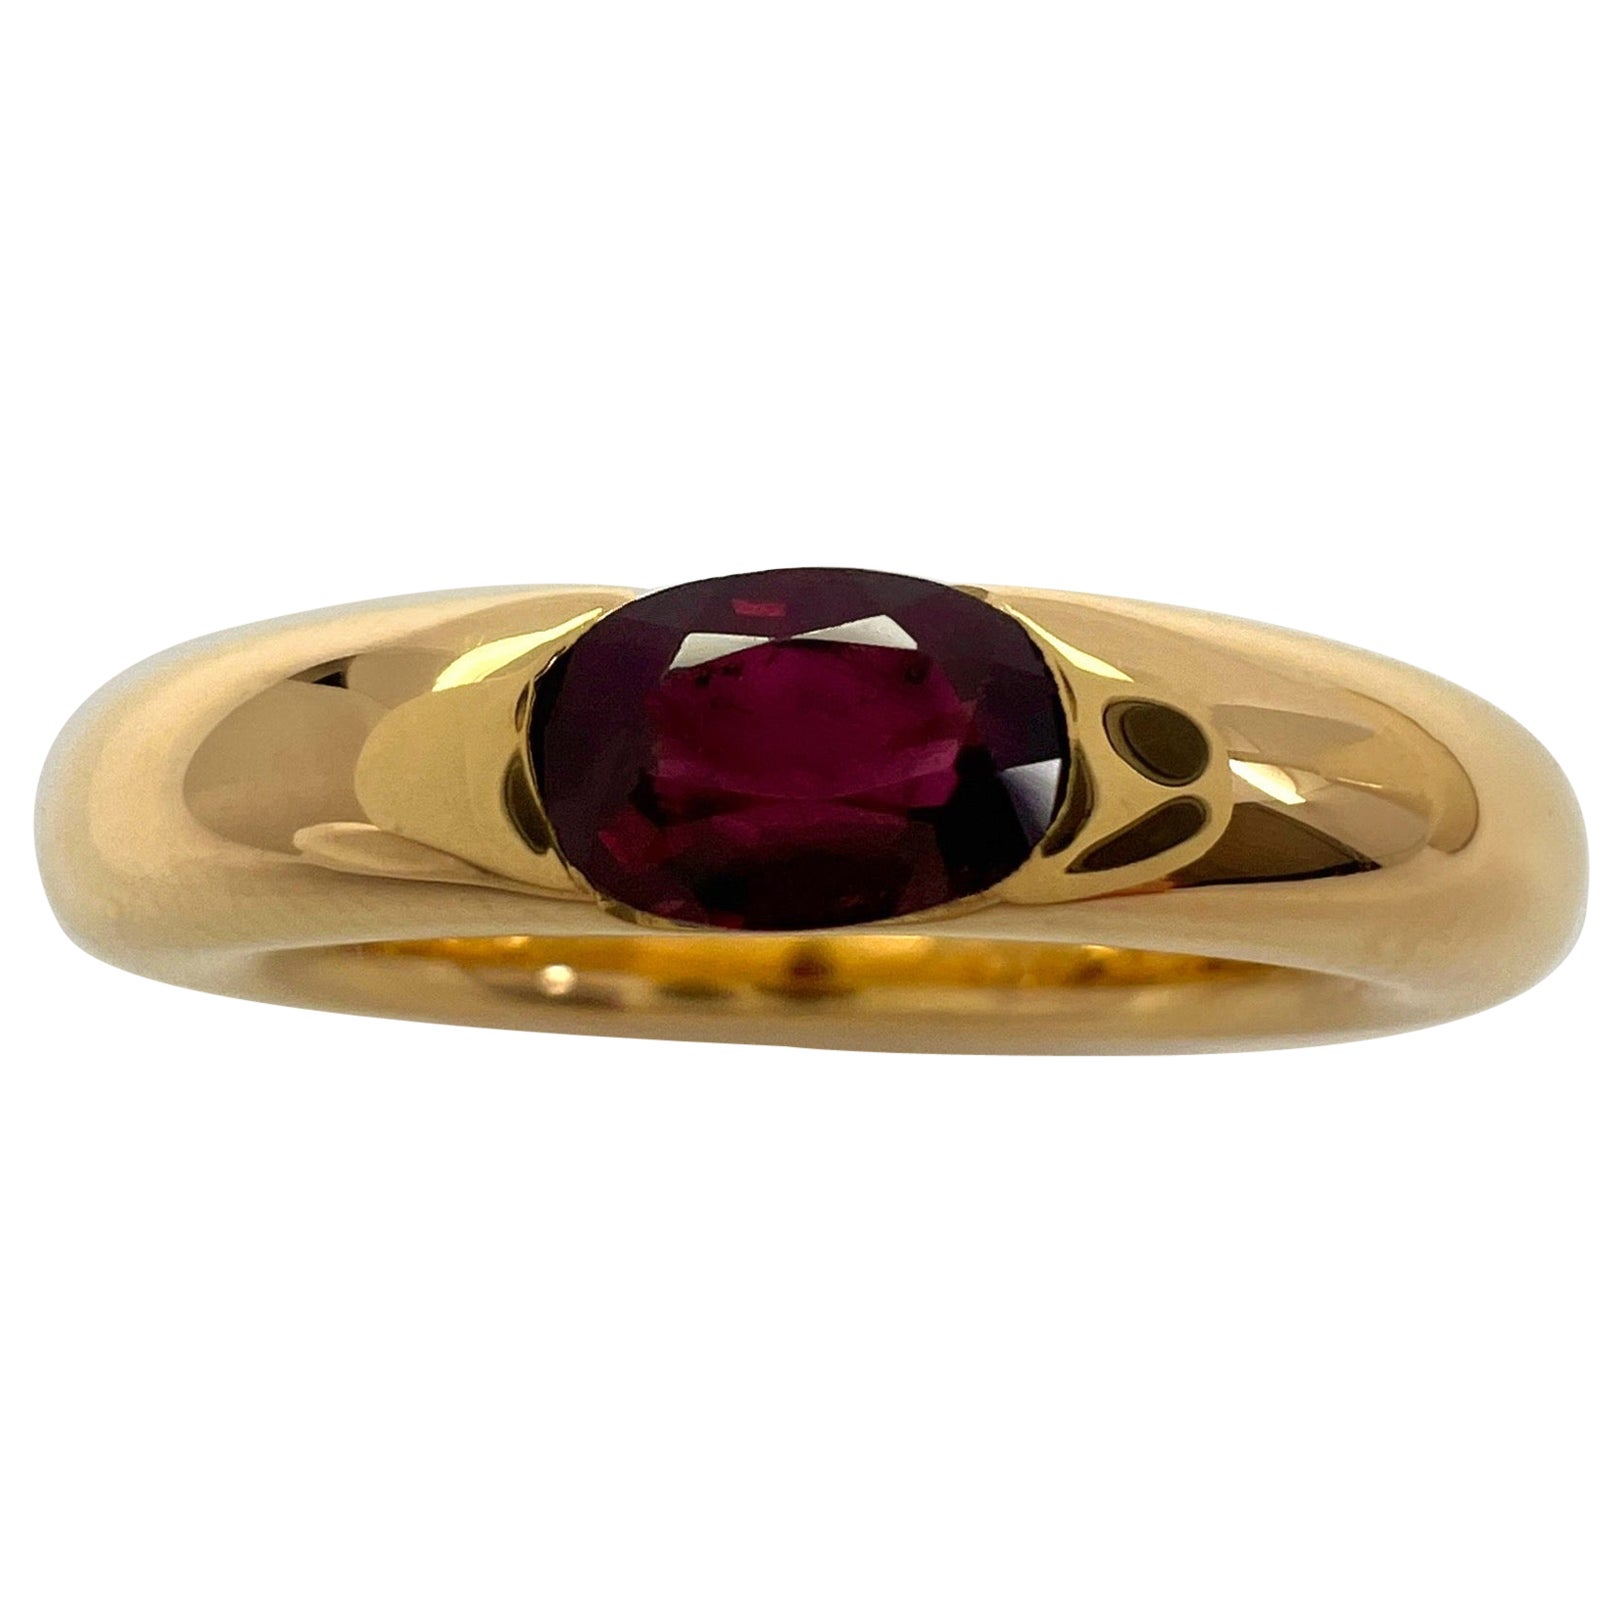 Vintage Cartier Deep Red Ruby Ellipse 18k Yellow Gold Oval Solitaire Ring 50 US5